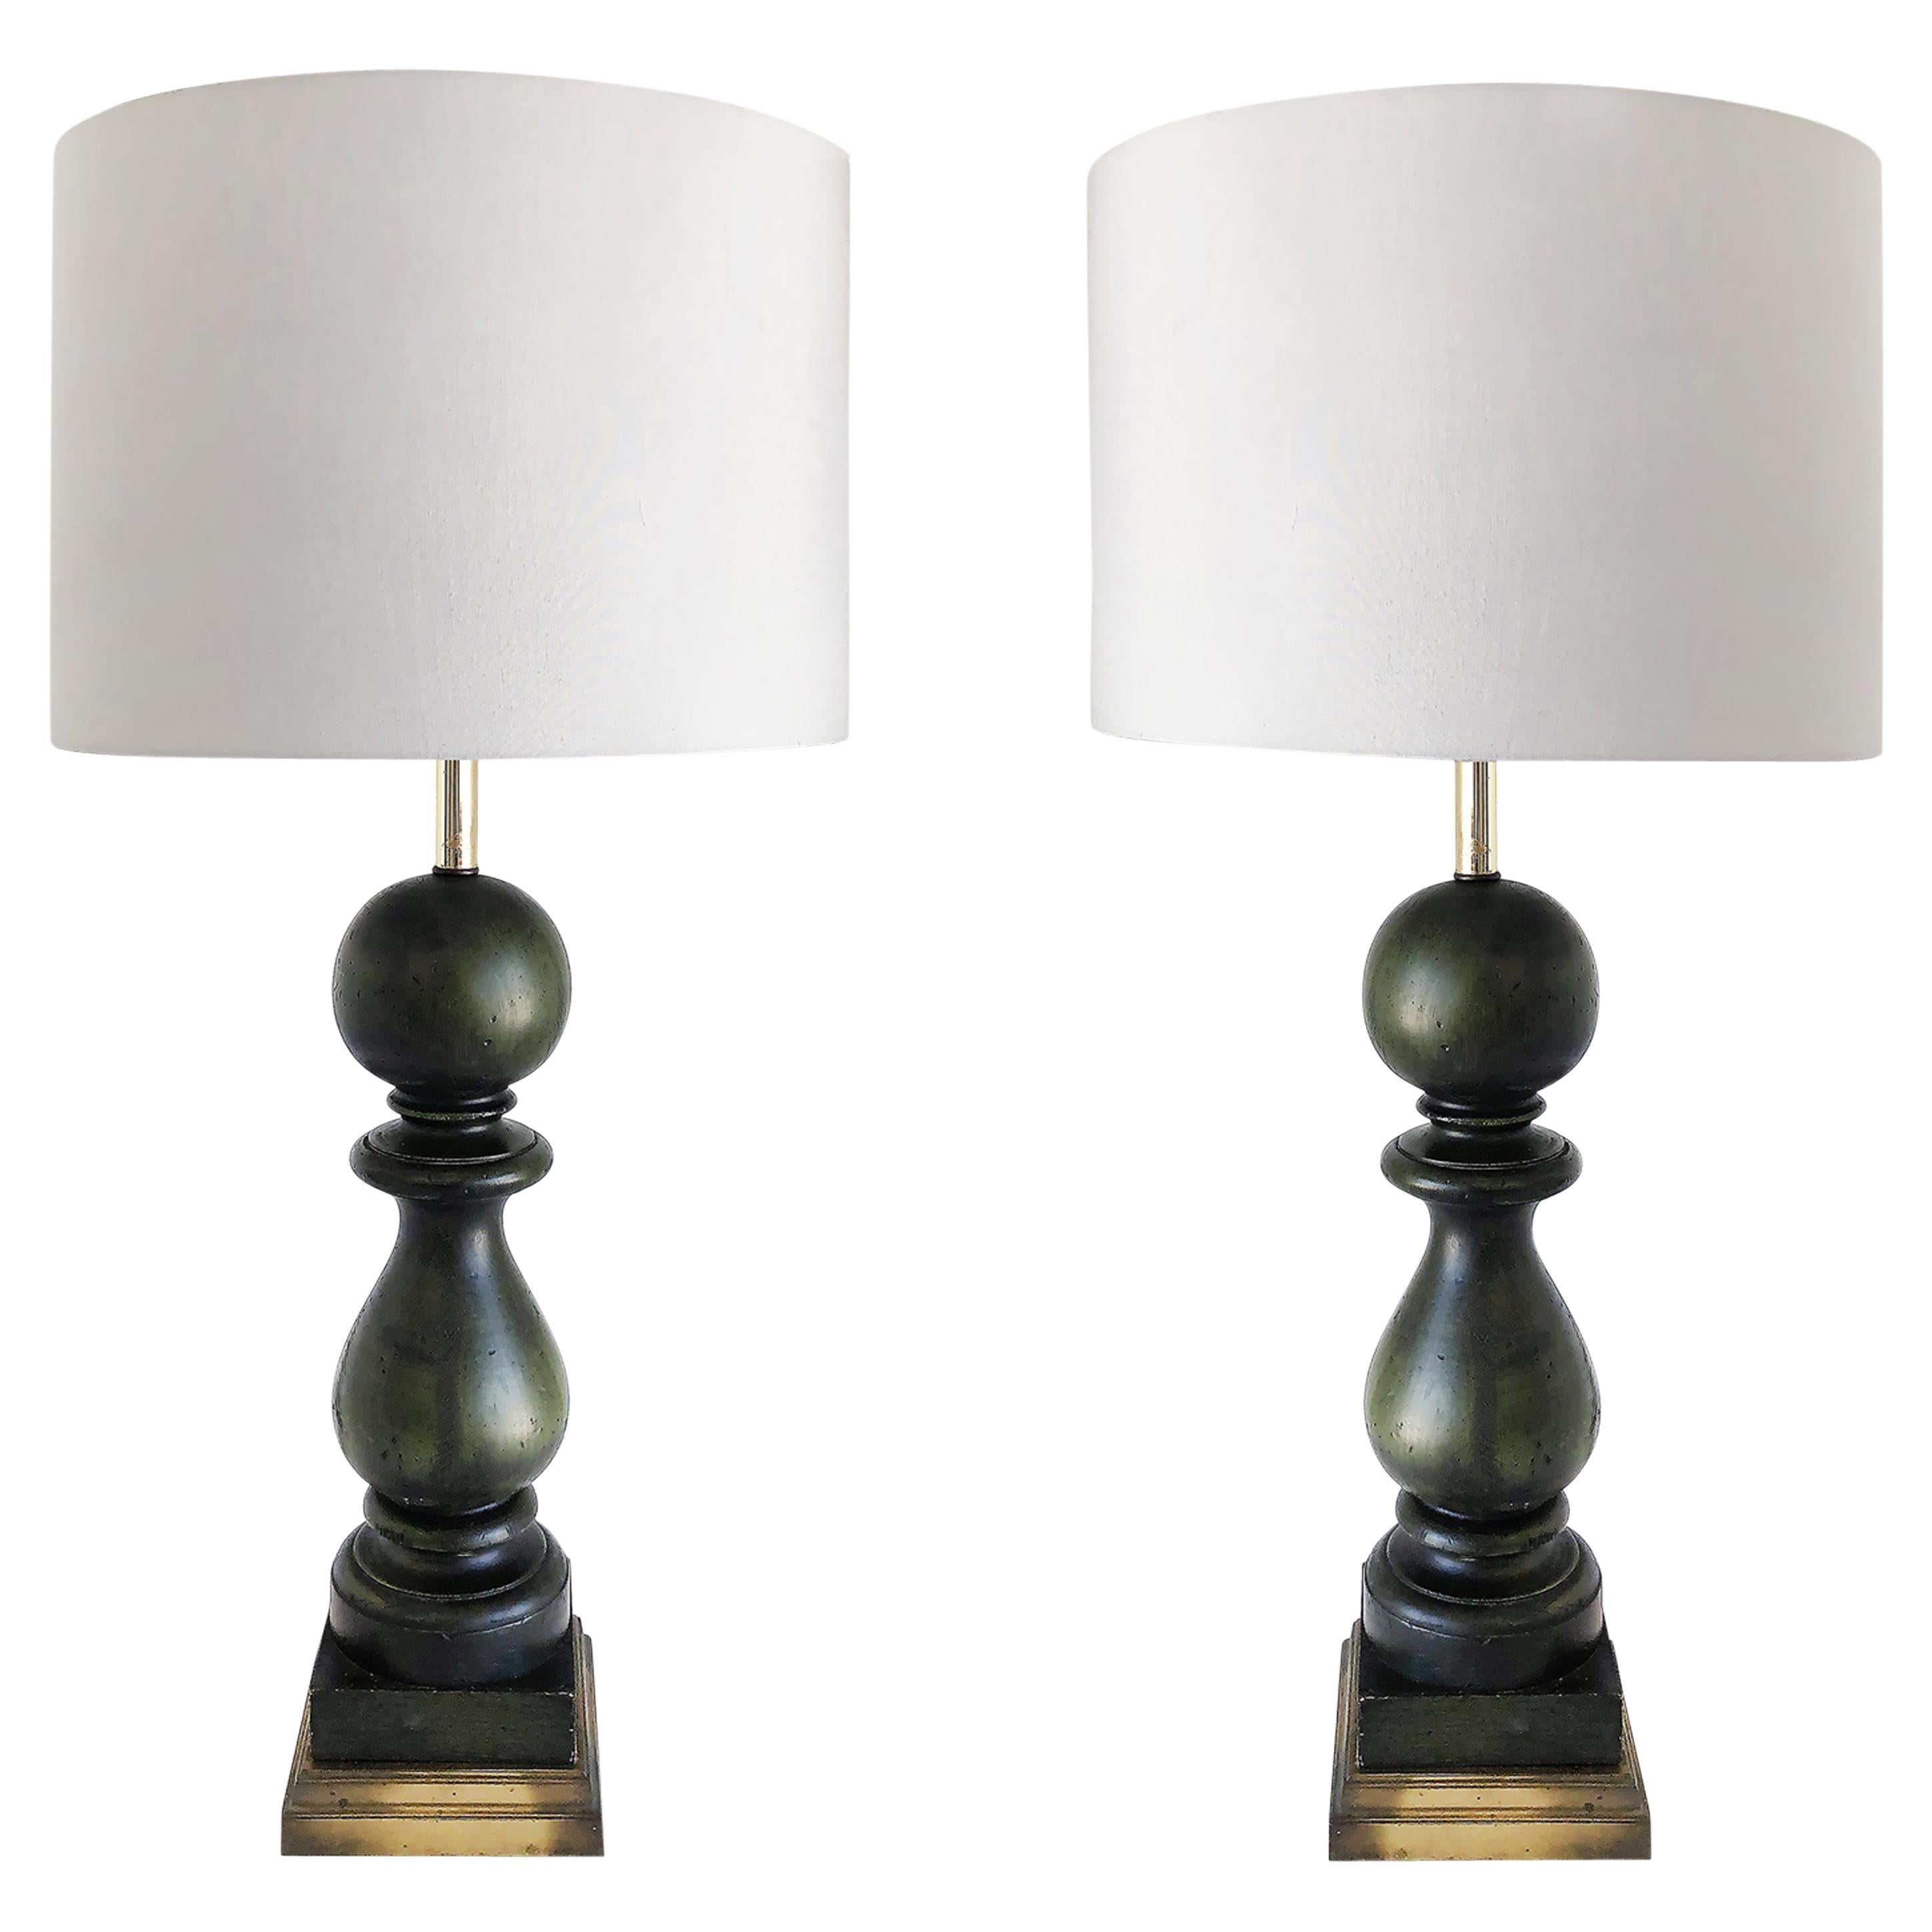 Overscale Vintage Carved Wood Balustrade Table Lamps